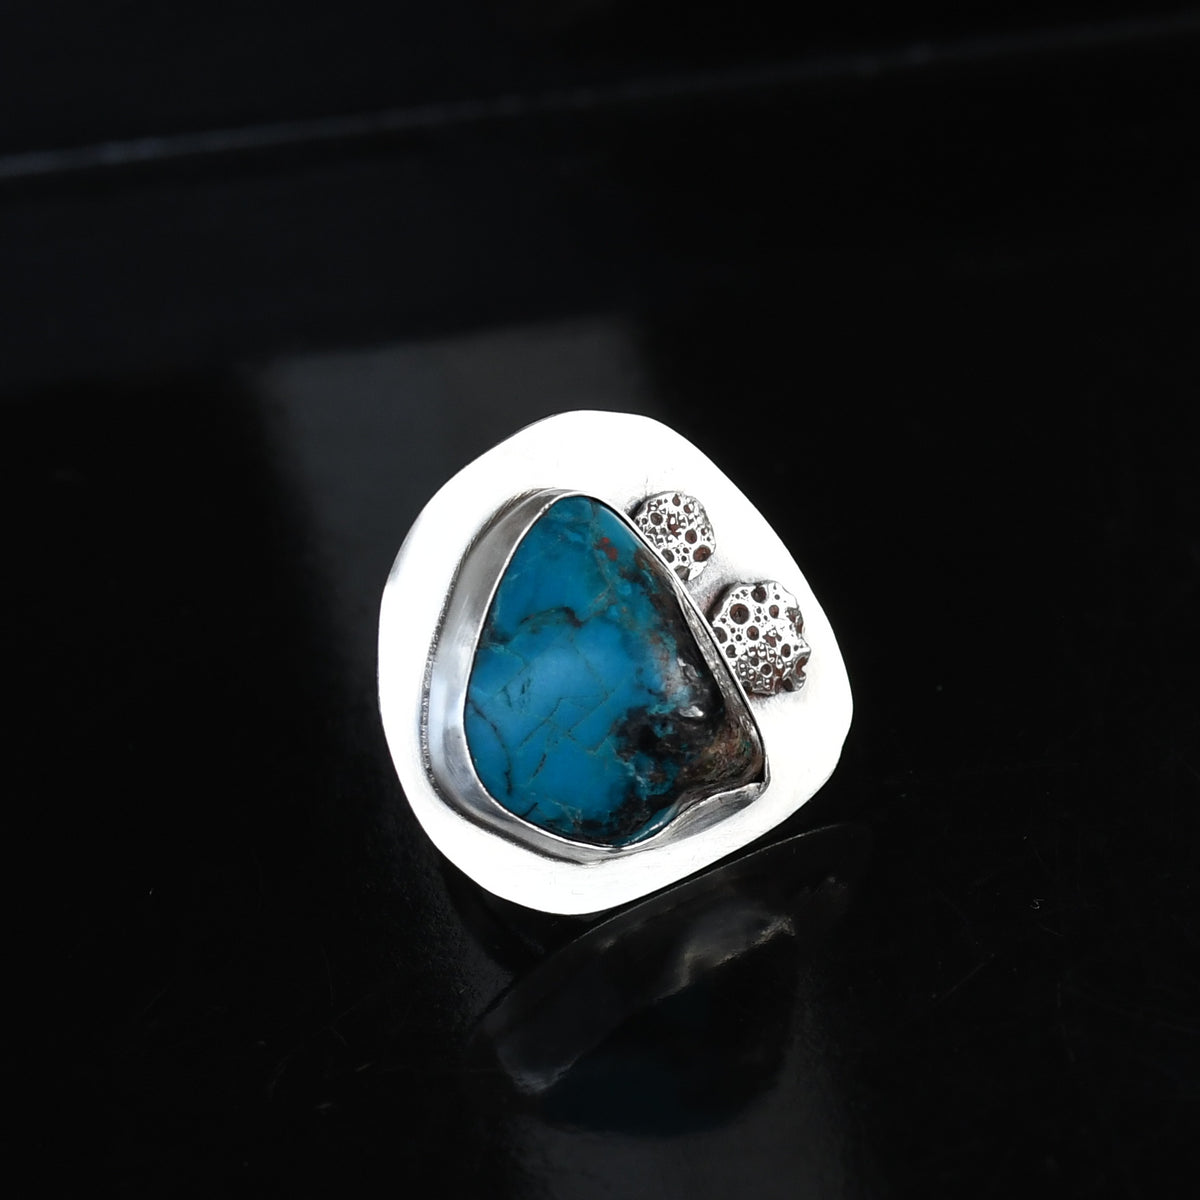 Ocean Waves in Chrysocolla gemstone and silver ring adjustable size